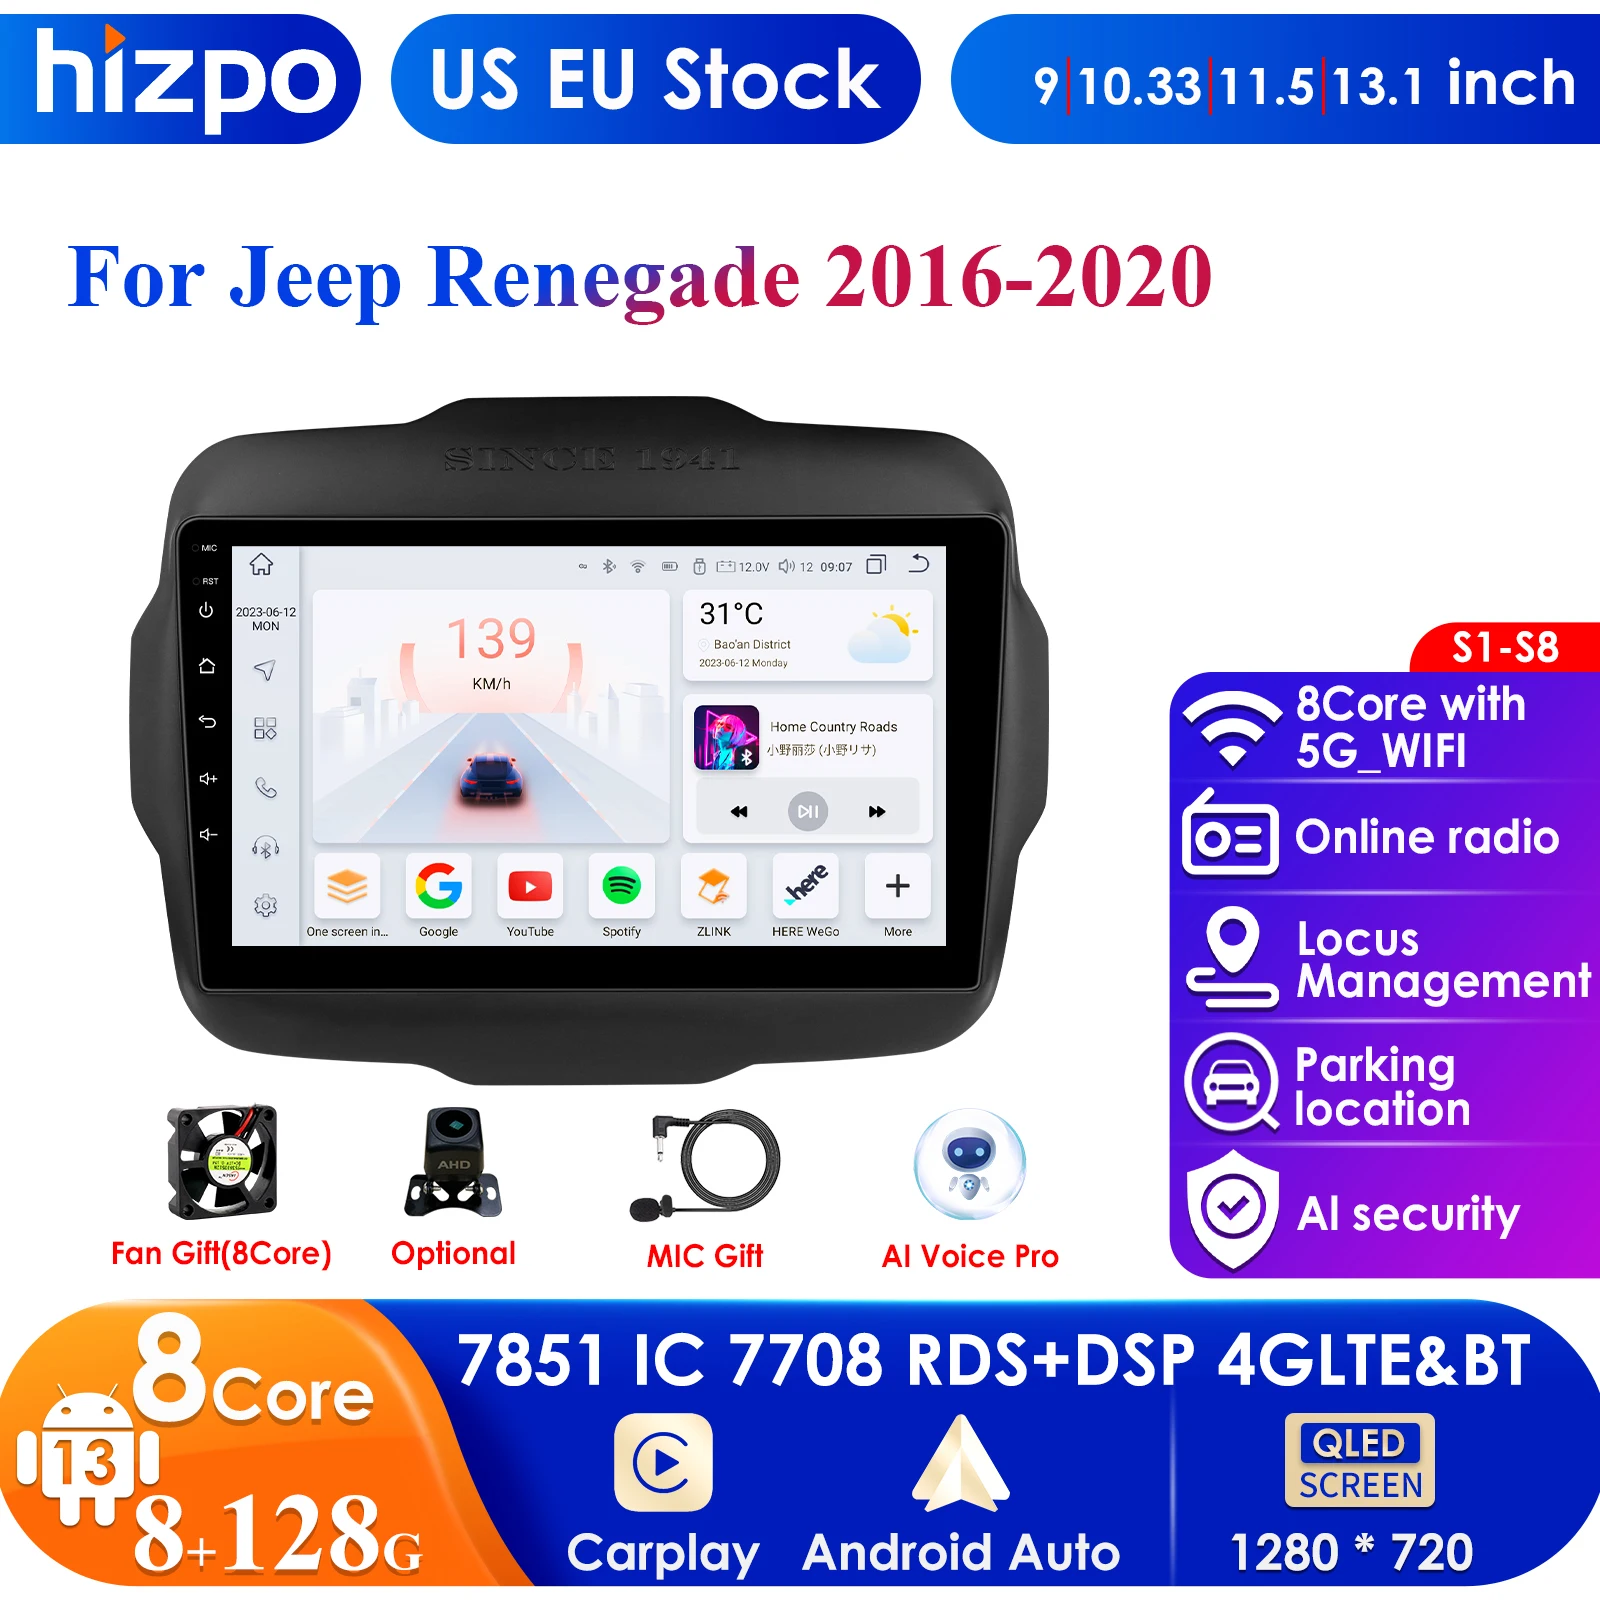 

2 Din Car Radio Android Auto CarPlay for Jeep Renegade 2016 2017 2018 2019 2020 Video Multimedia Player WIFI 2din Navigation GPS